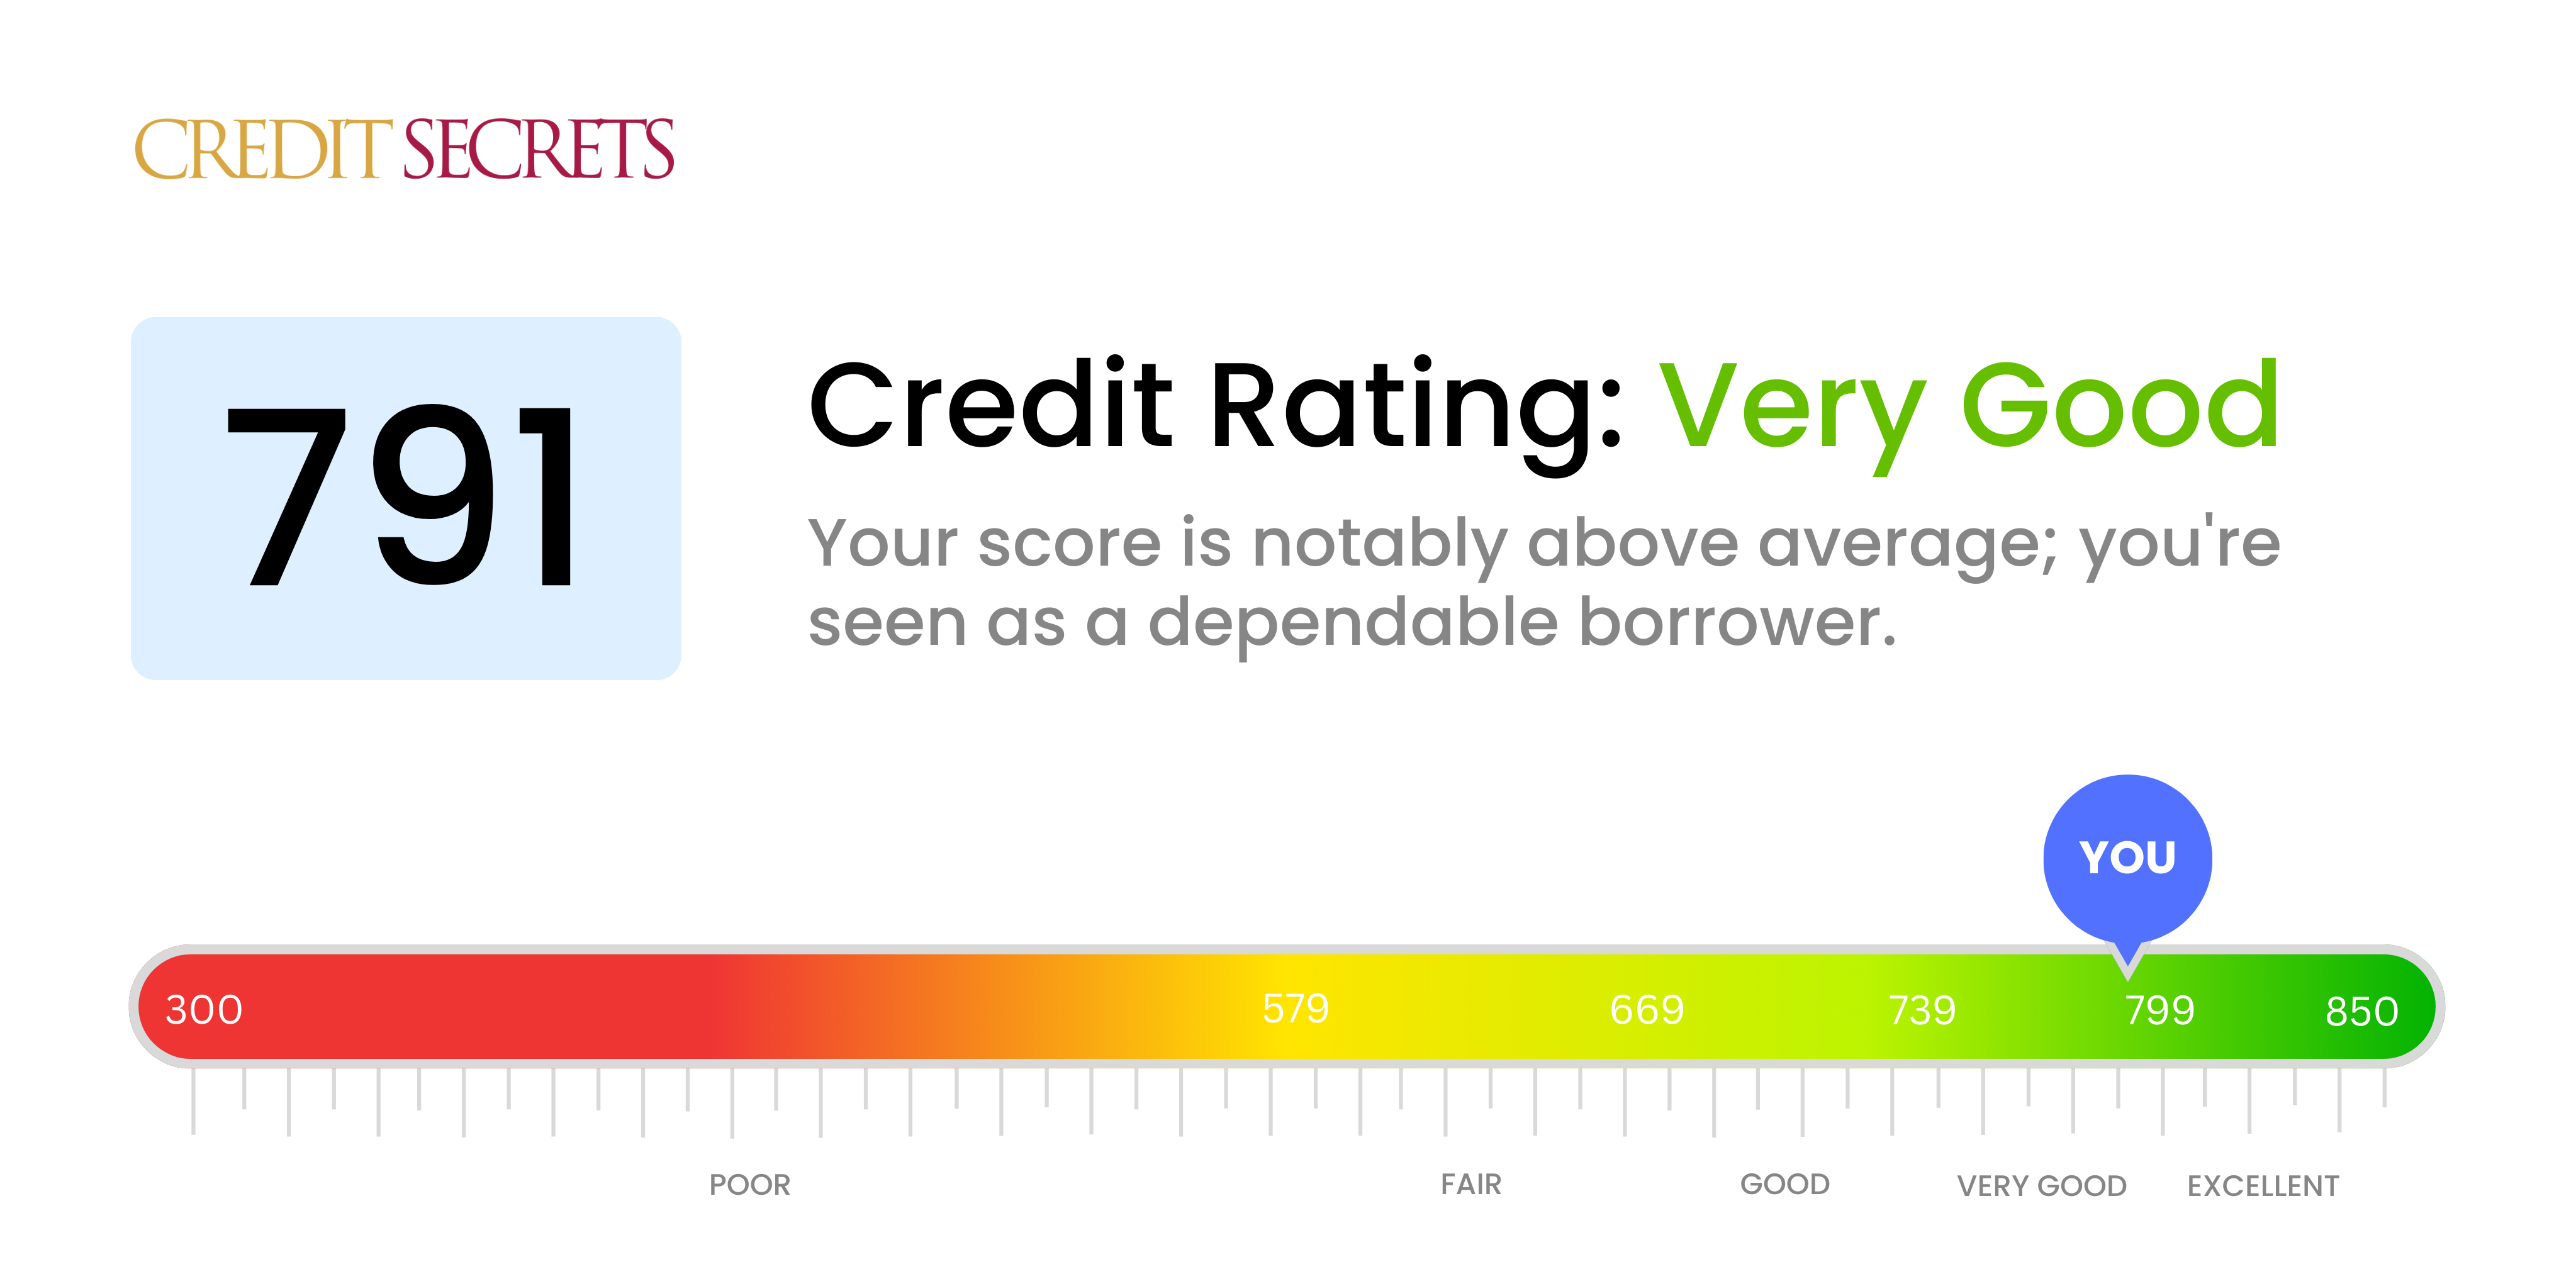 Is 791 a good credit score?